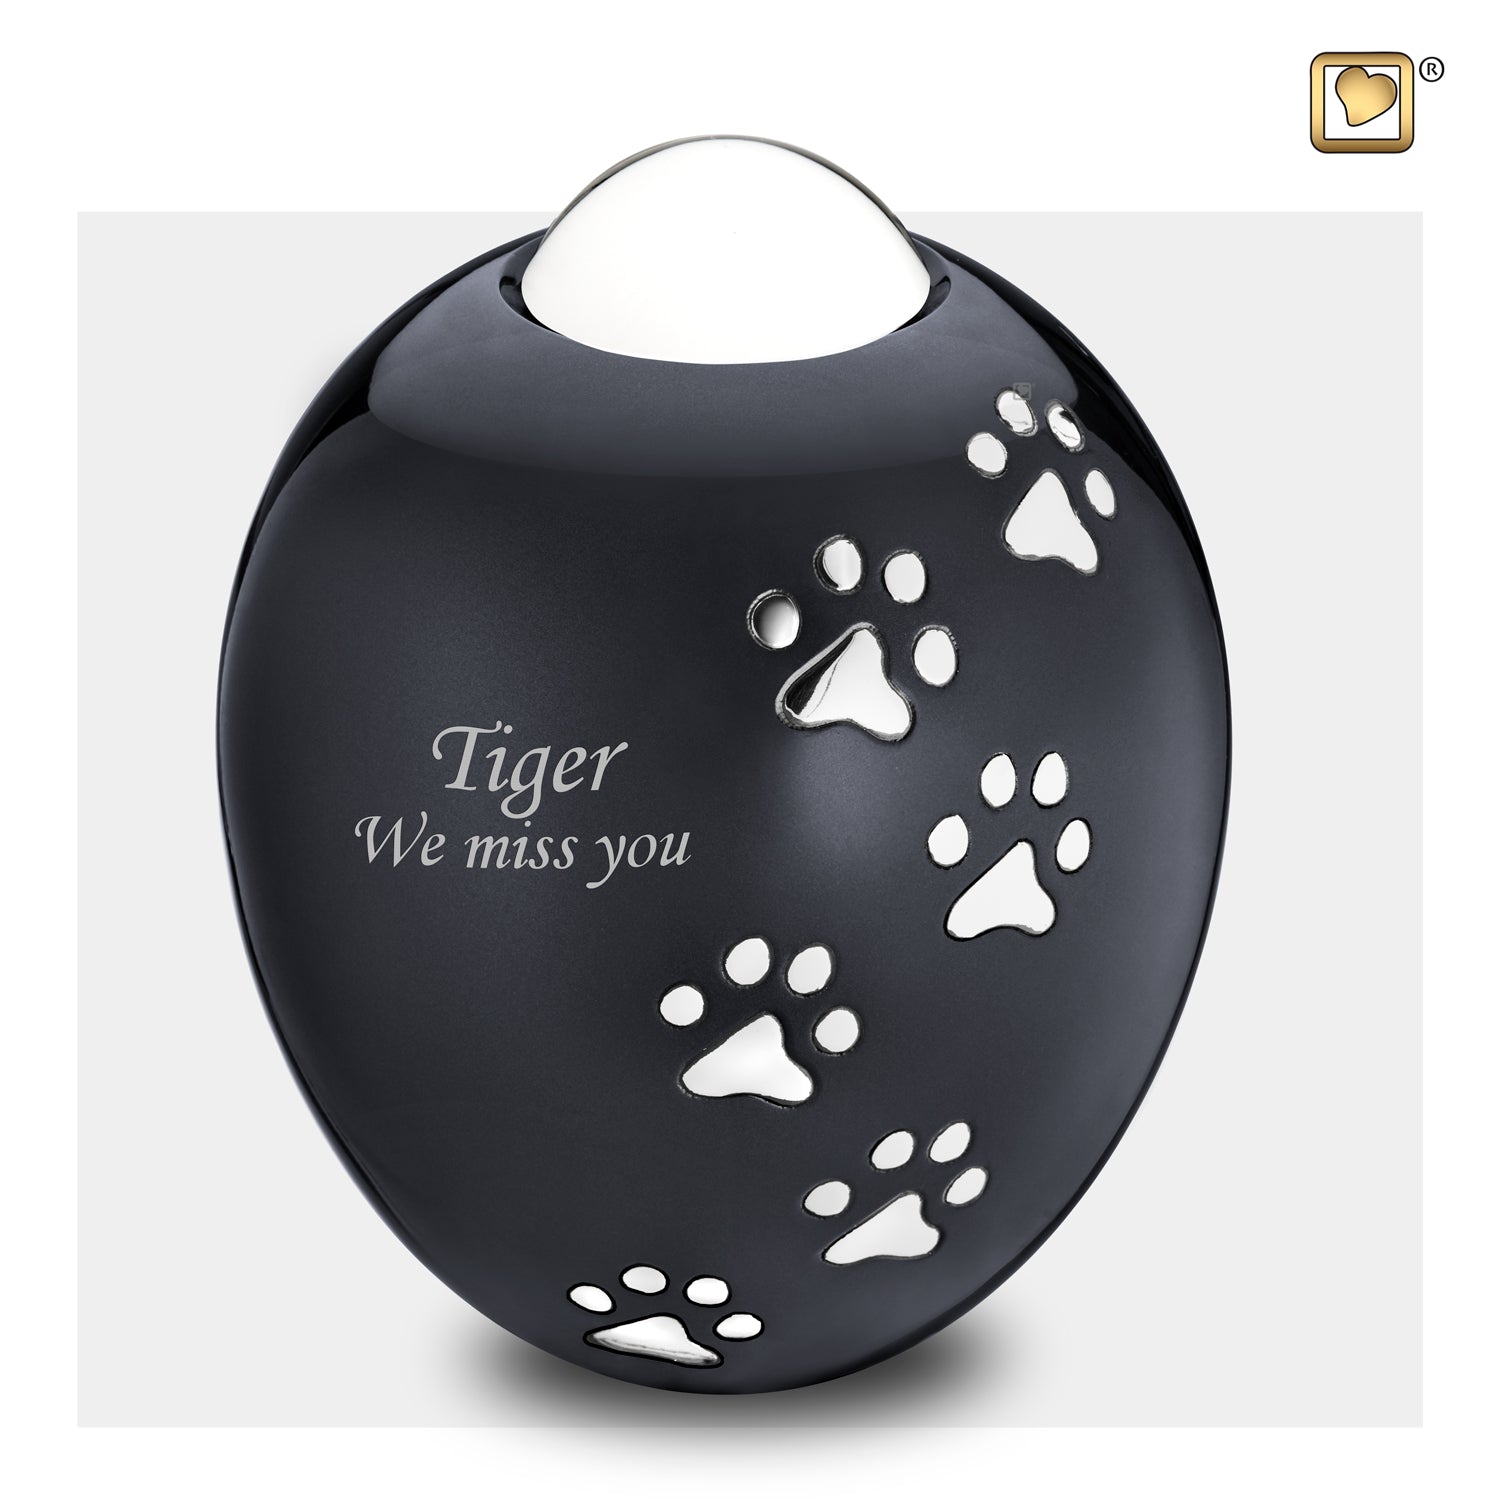 Adore™ Midnight Black Colored Paw Printed Oval Shaped Large Pet Cremation Urn